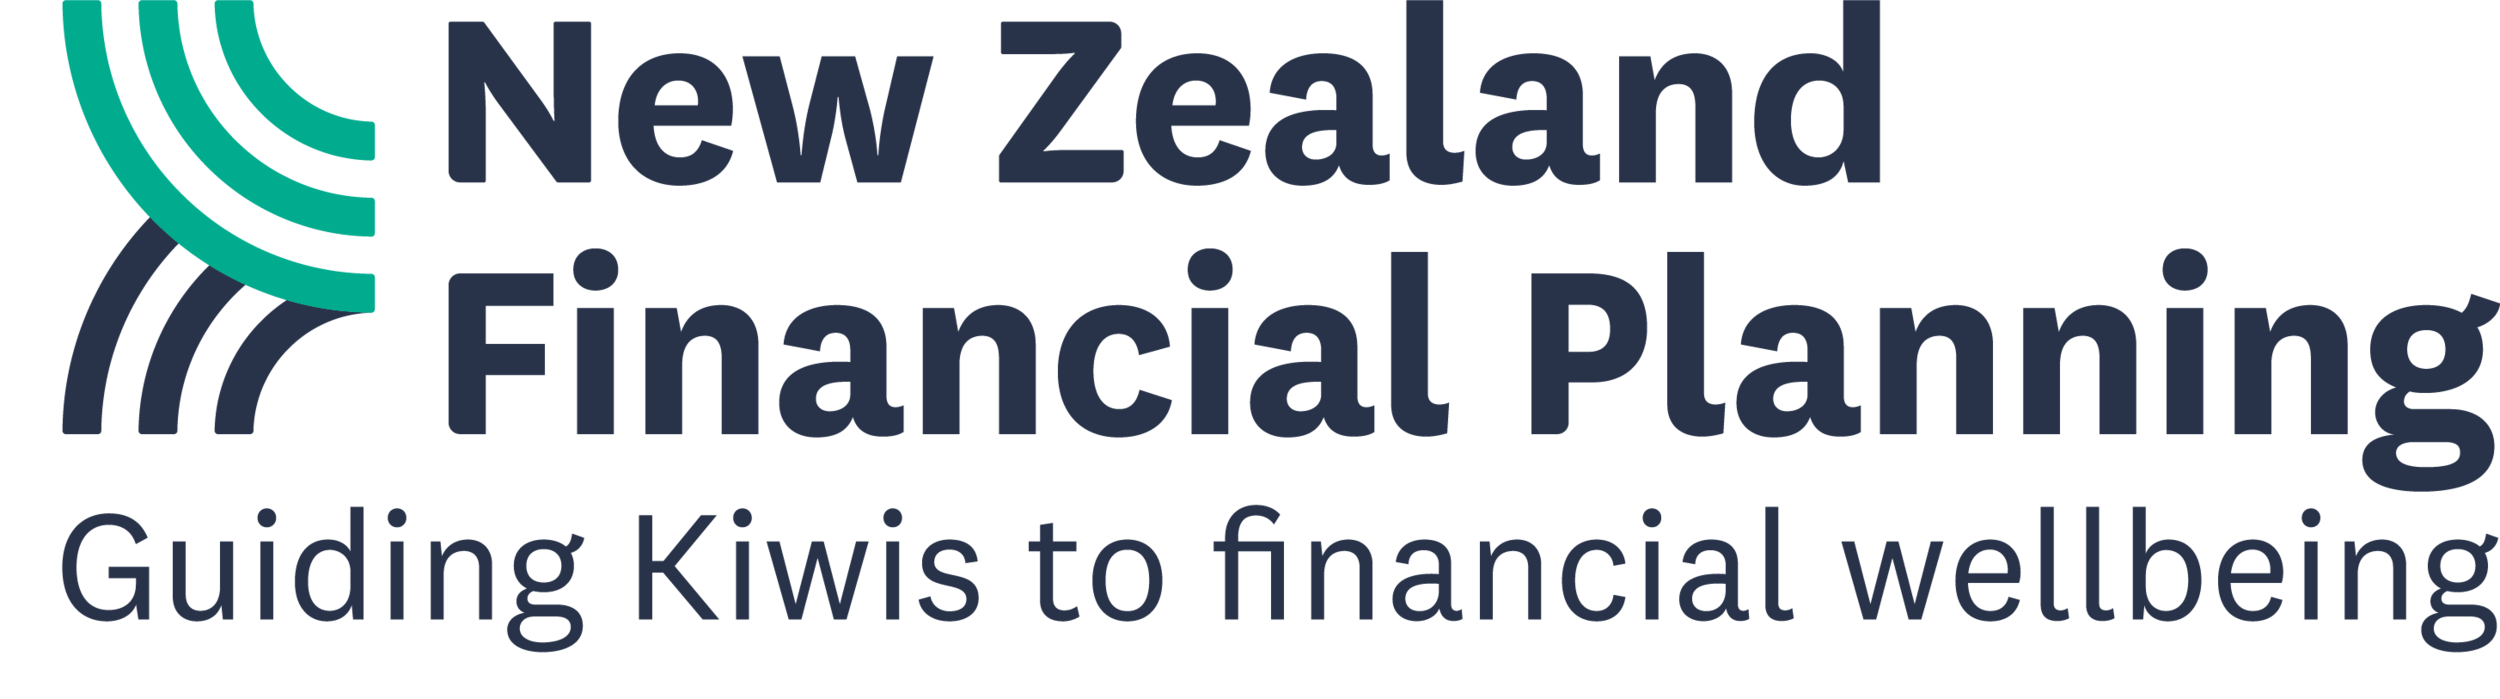 NZFP Logo_Tagline__Primary - Full Colour.png